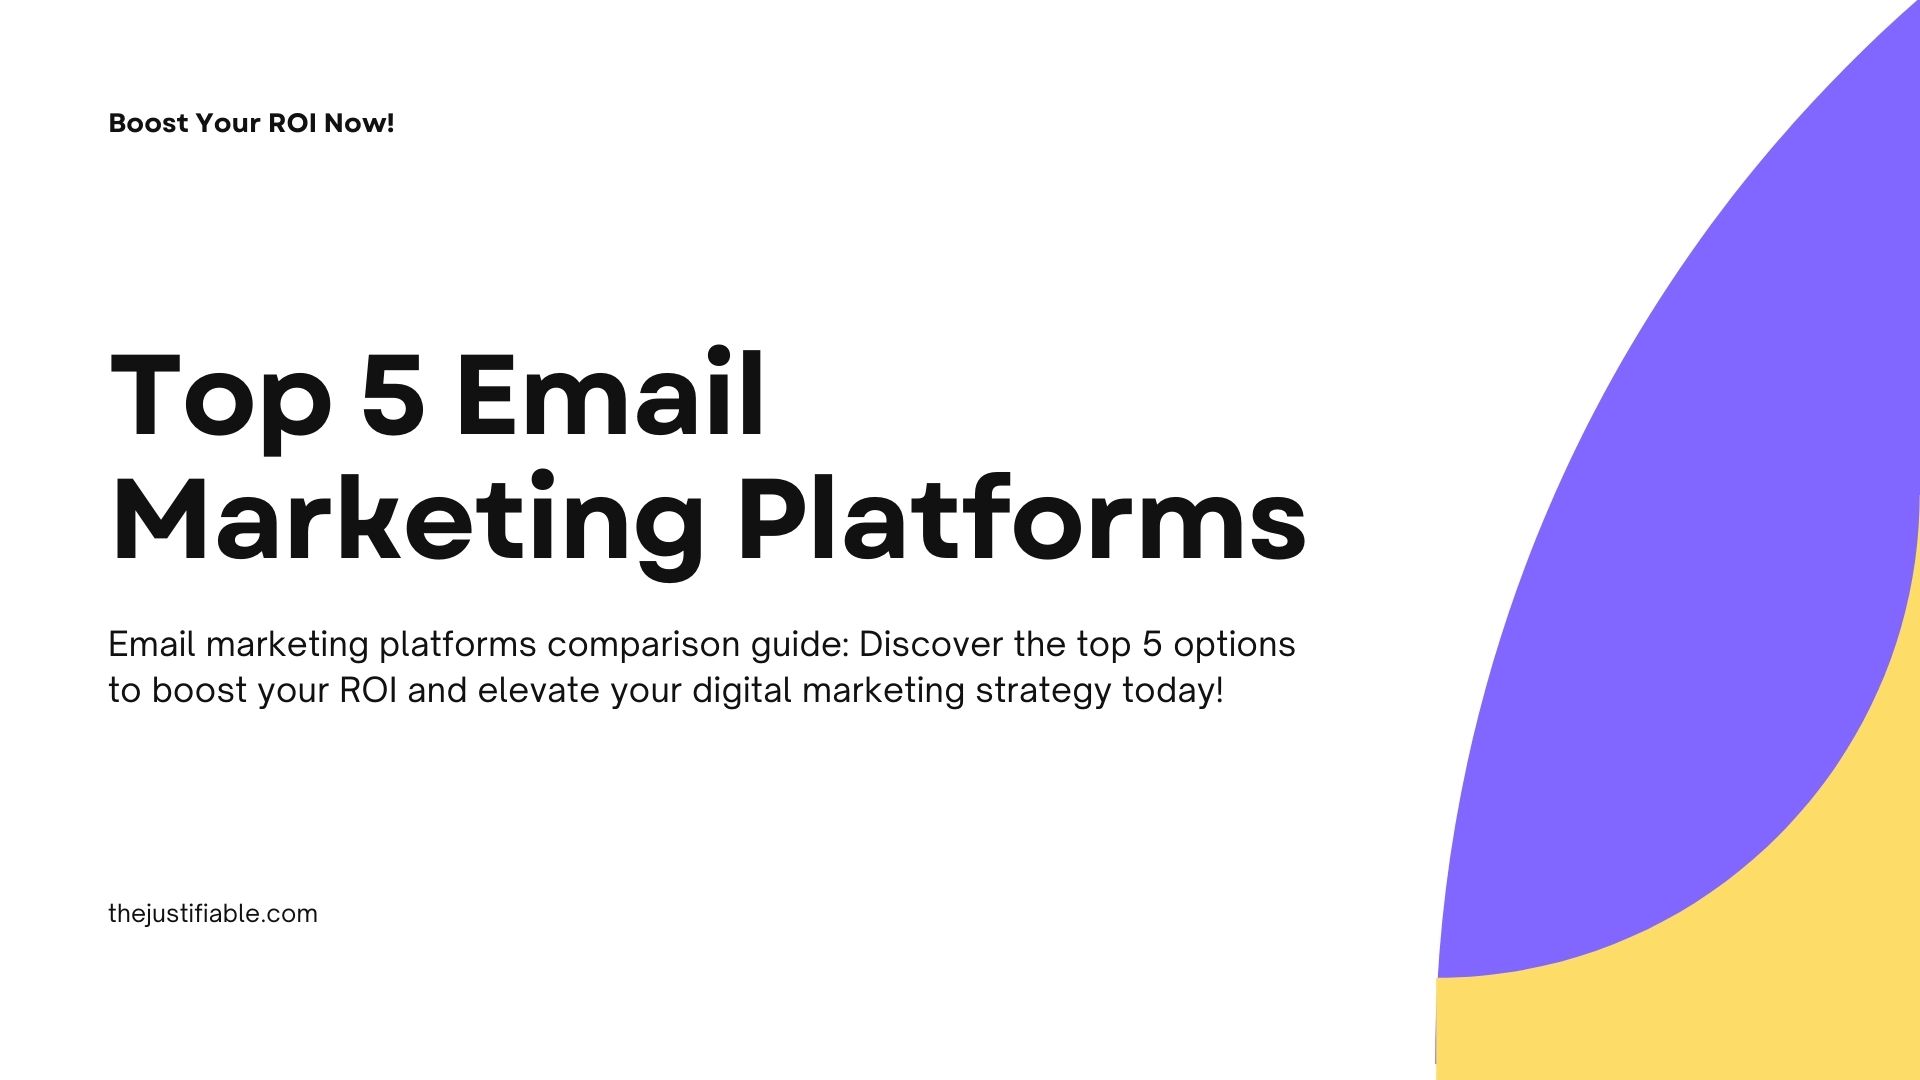 The image is a graphic related to email marketing platforms.